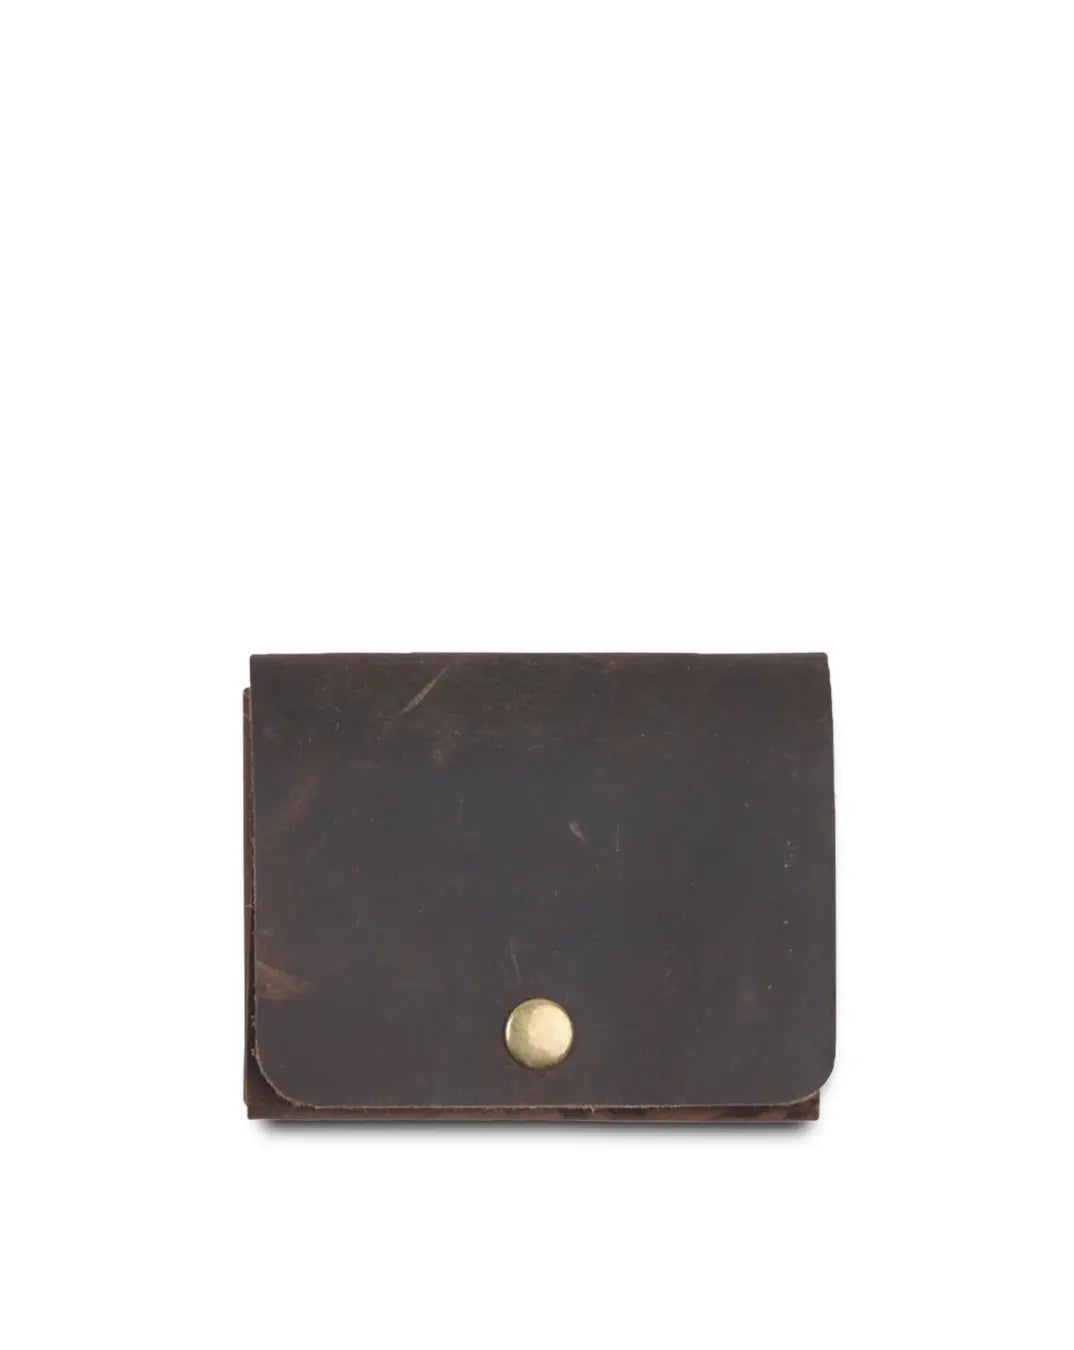 Handcrafted Leather Goods Made in USA - Brynn Capella